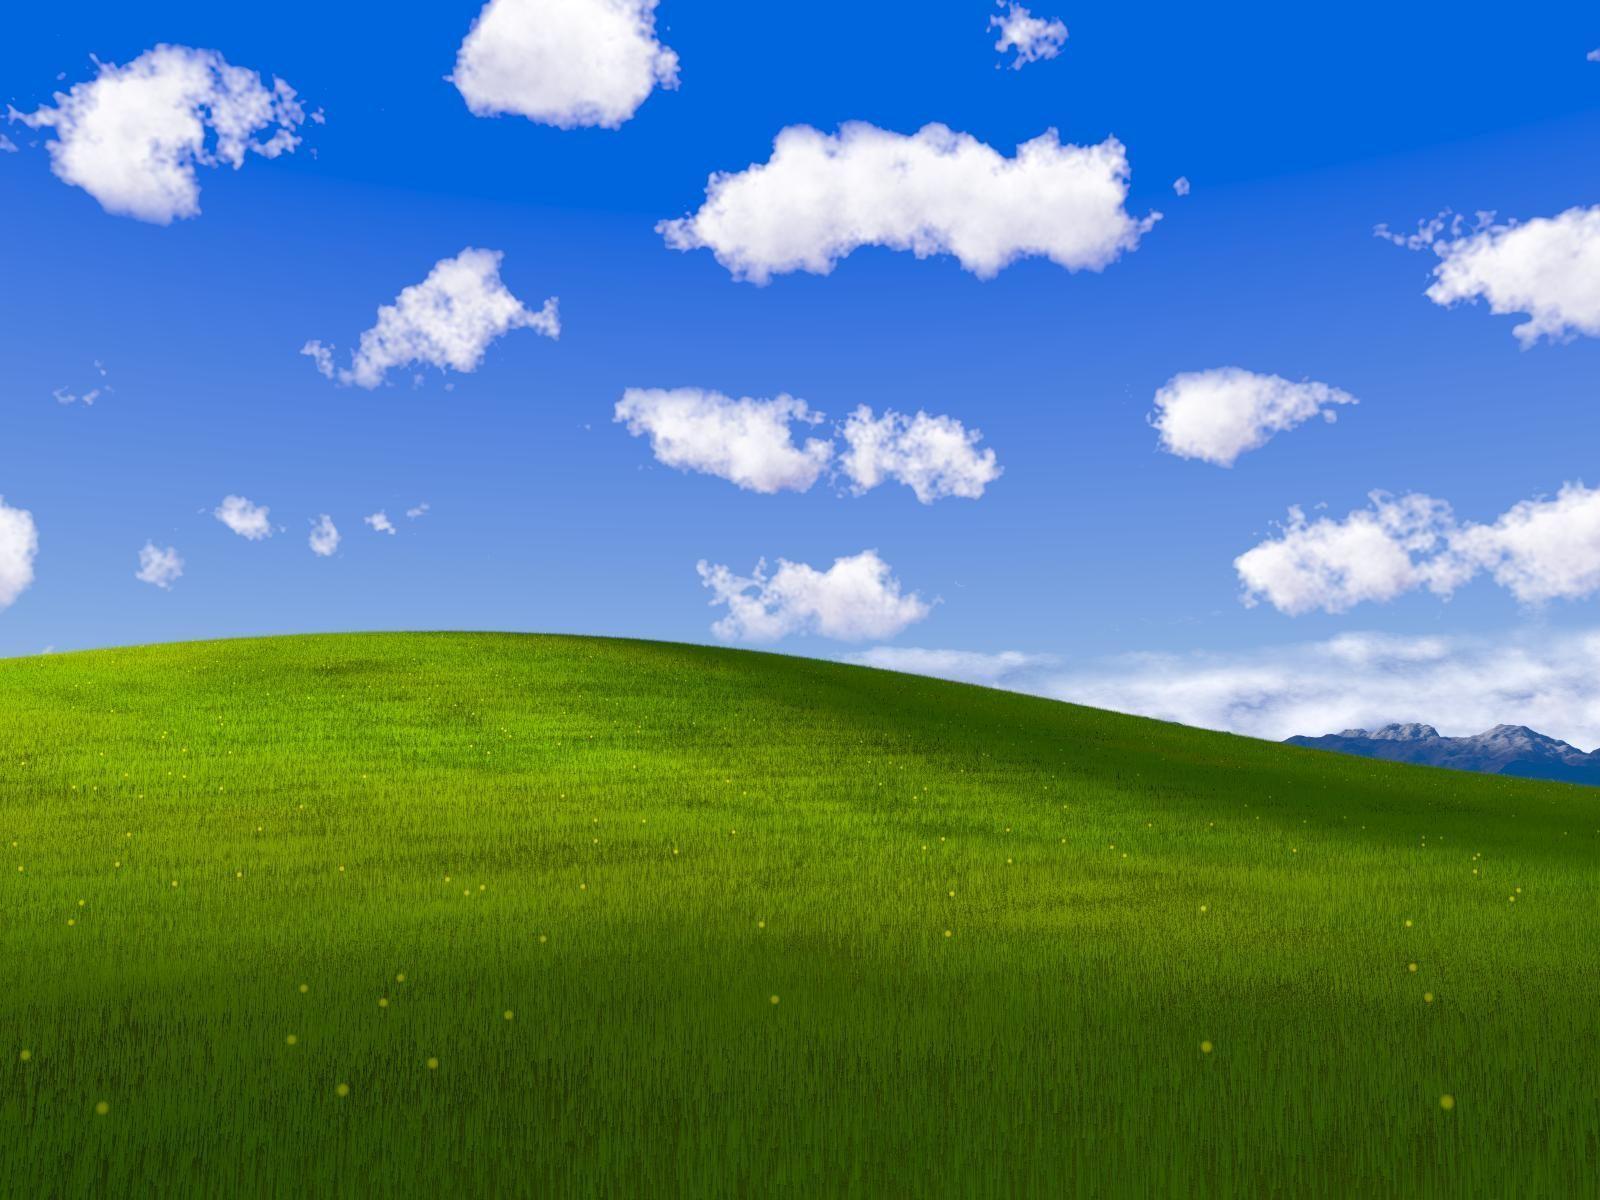 Windows XP BlissMinecraft edition Wallpaper available in 4K Check  comments  uMetaAesthics